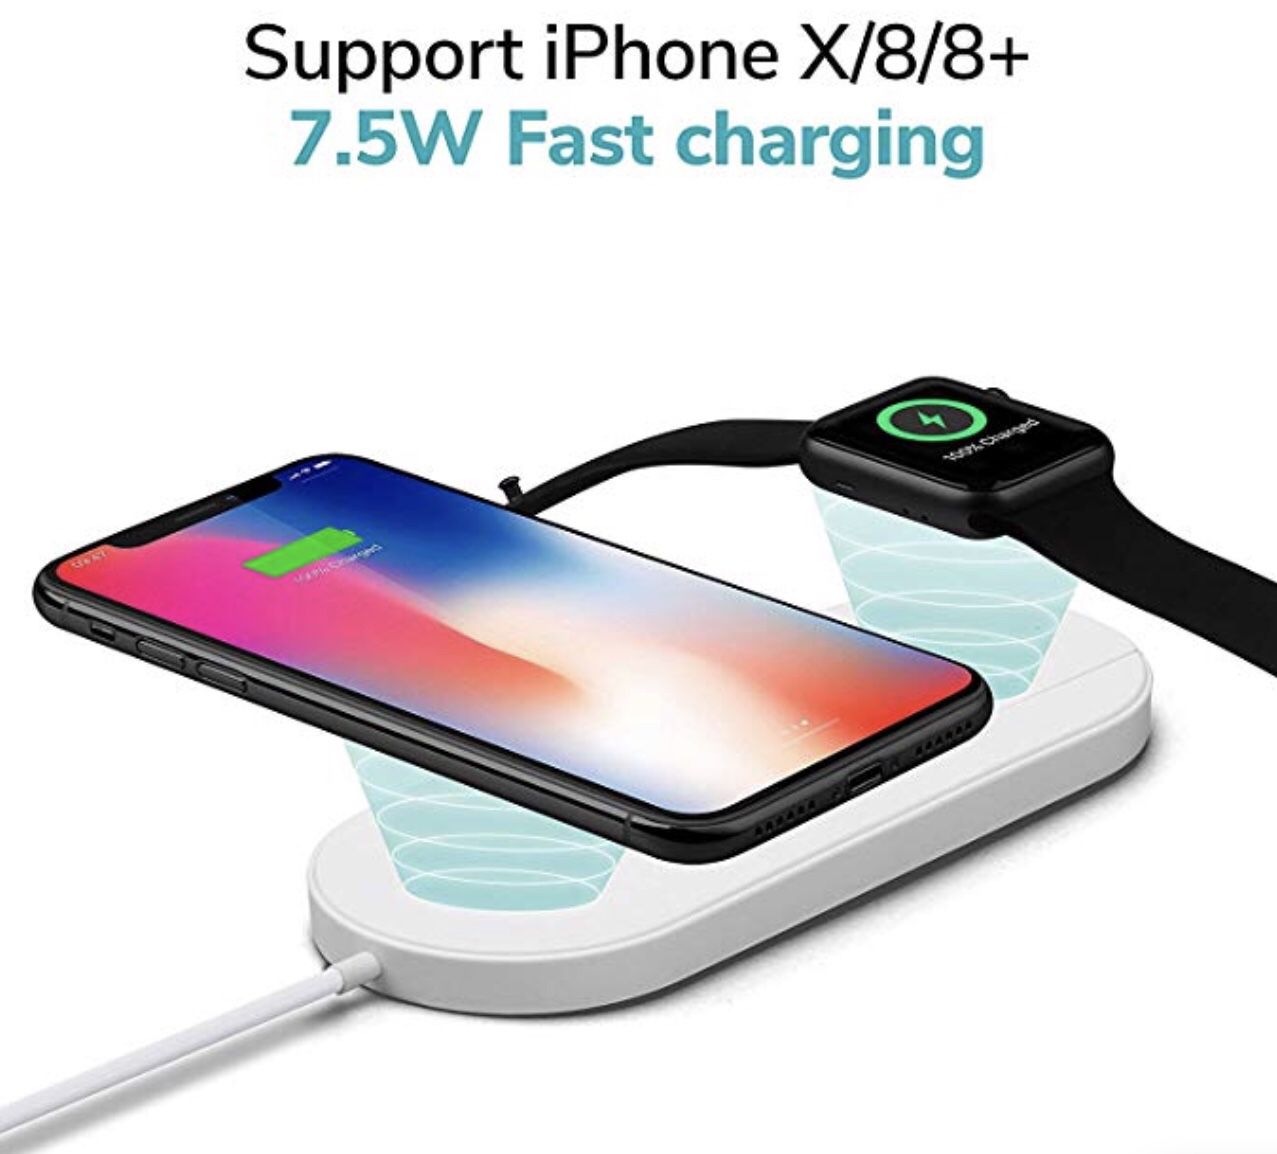 Wireless Watch Charger,Phone Wireless Charger,Qi Wireless Charging Pad Stand,2-in-1 Wireless Fast Charger for Apple Watch Series 3/2/1 & iPhone X/8/8